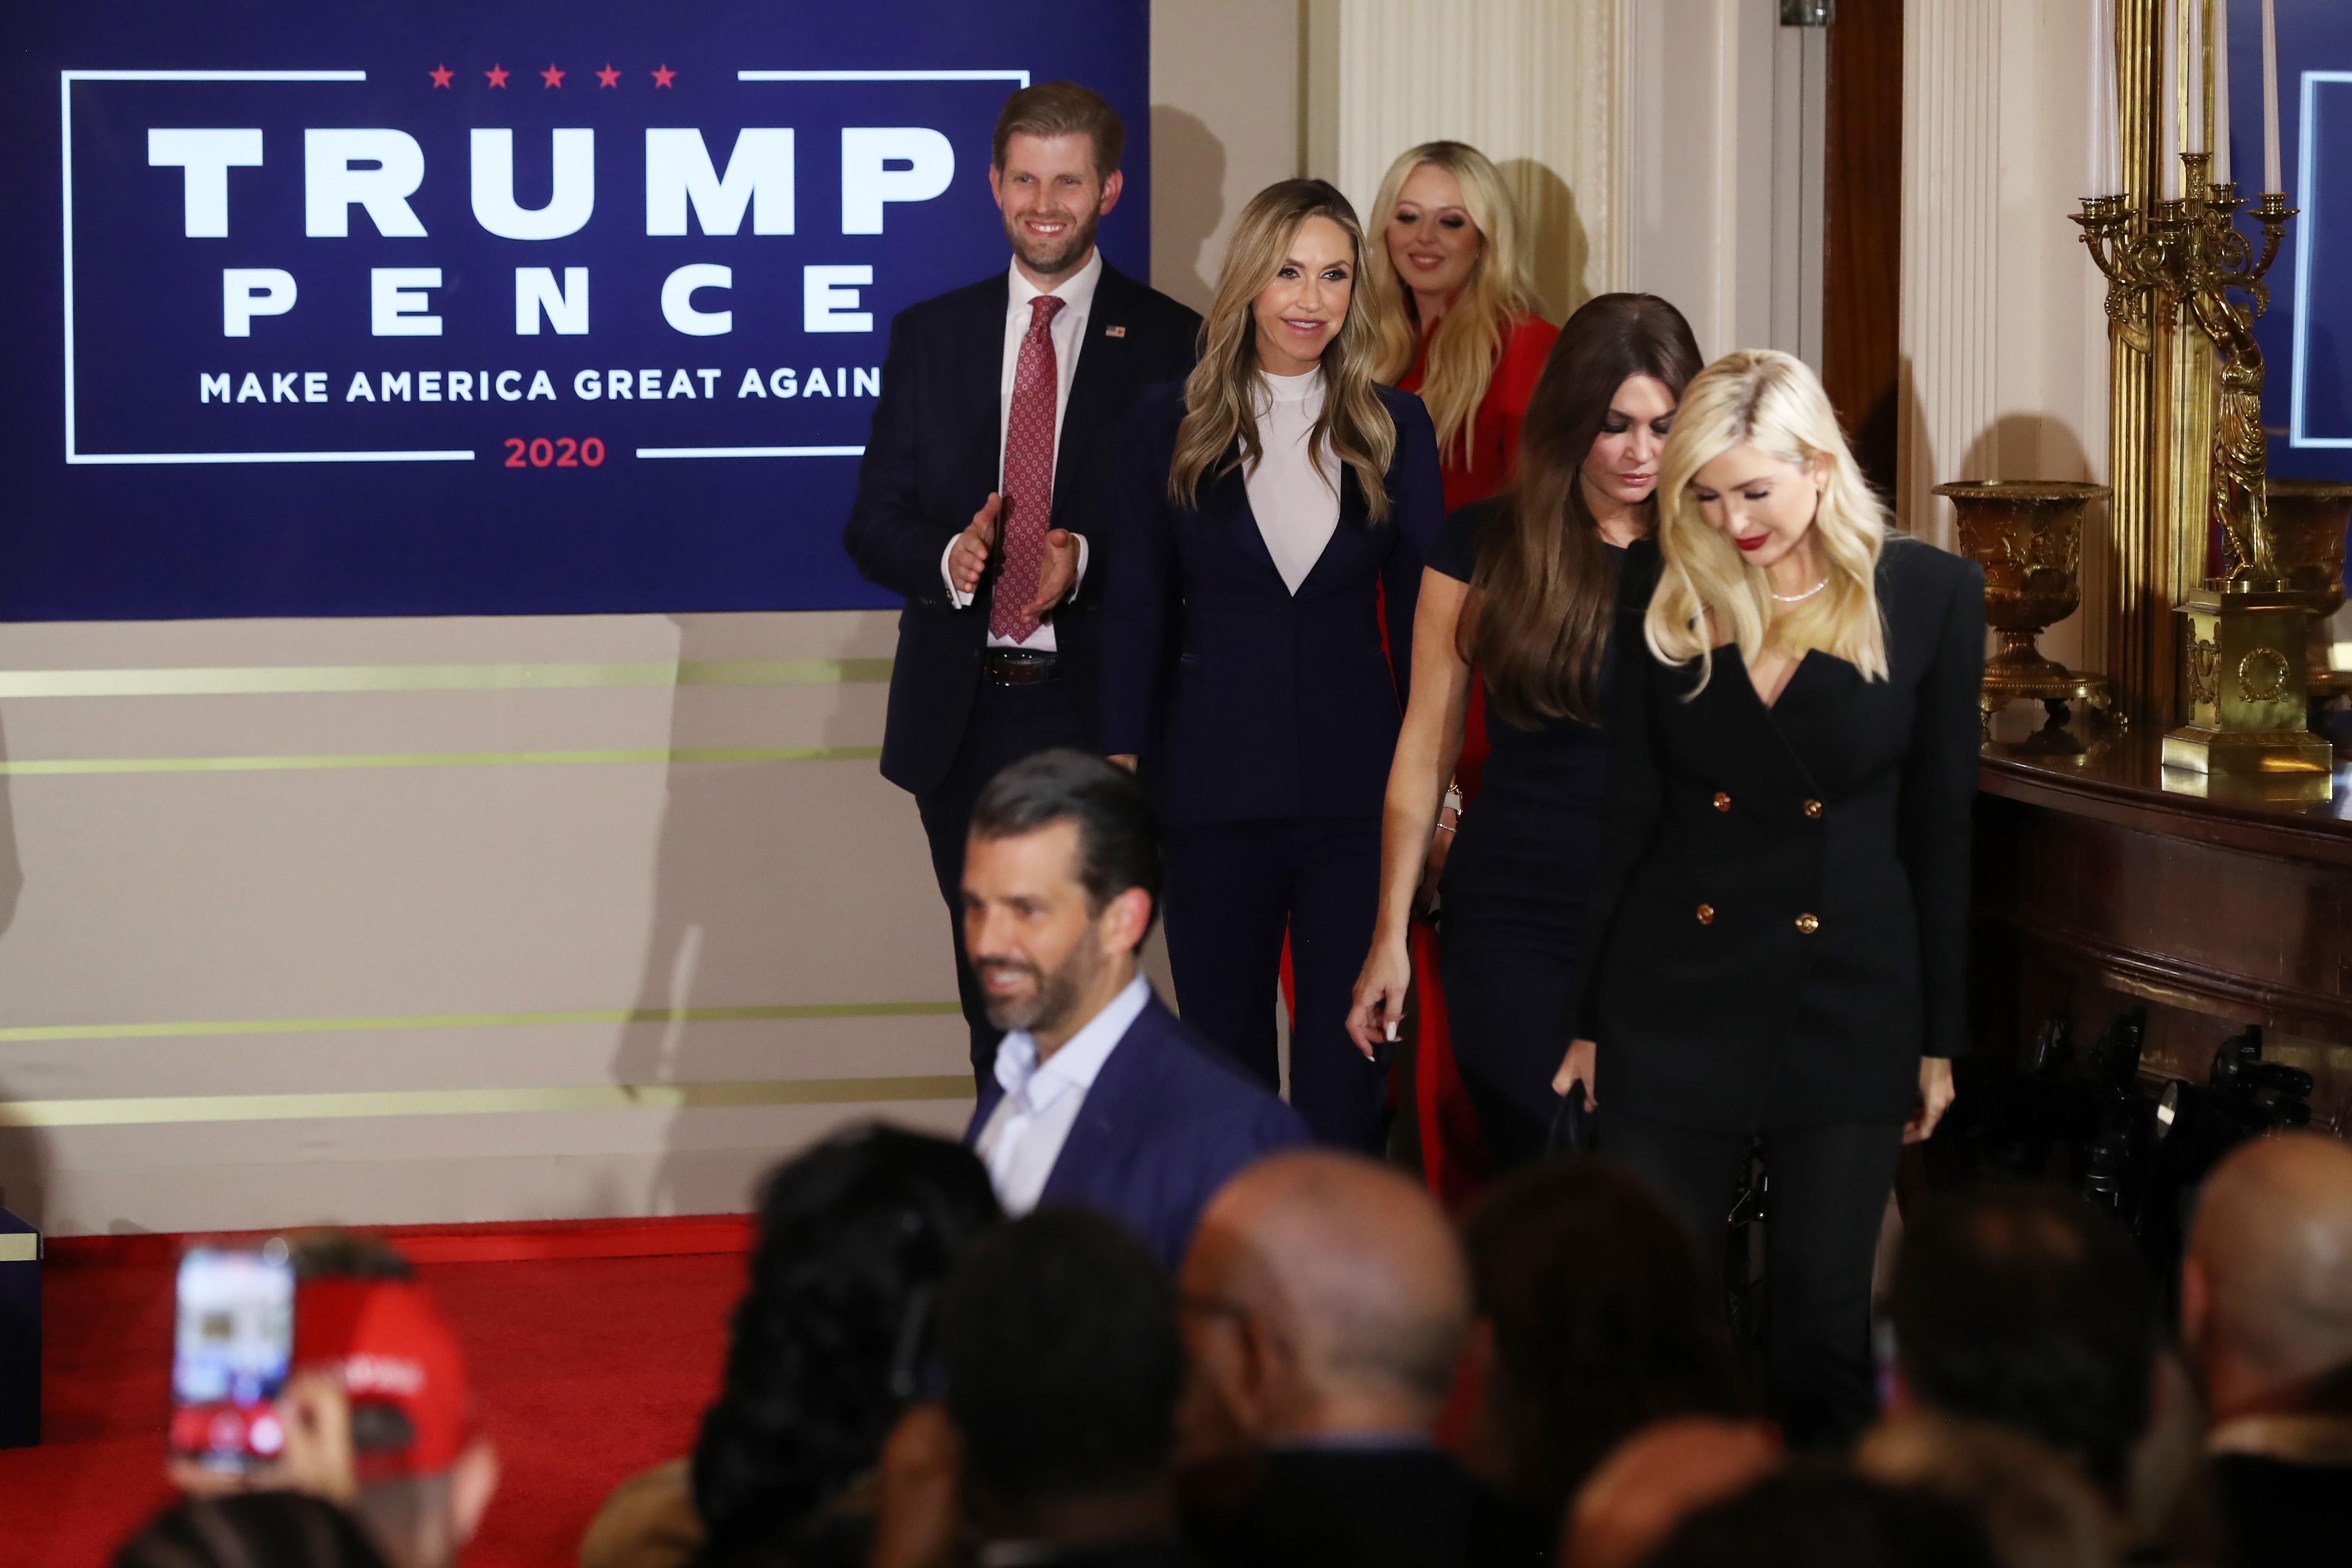 Donald Trump Jr., Ivanka Trump, Kimberly Guilfoyle, Lara Trump, Eric Trump, and Tiffany Trump appear on election night in the East Room of the White House in the early morning hours of November 04, 2020 in Washington, DC.